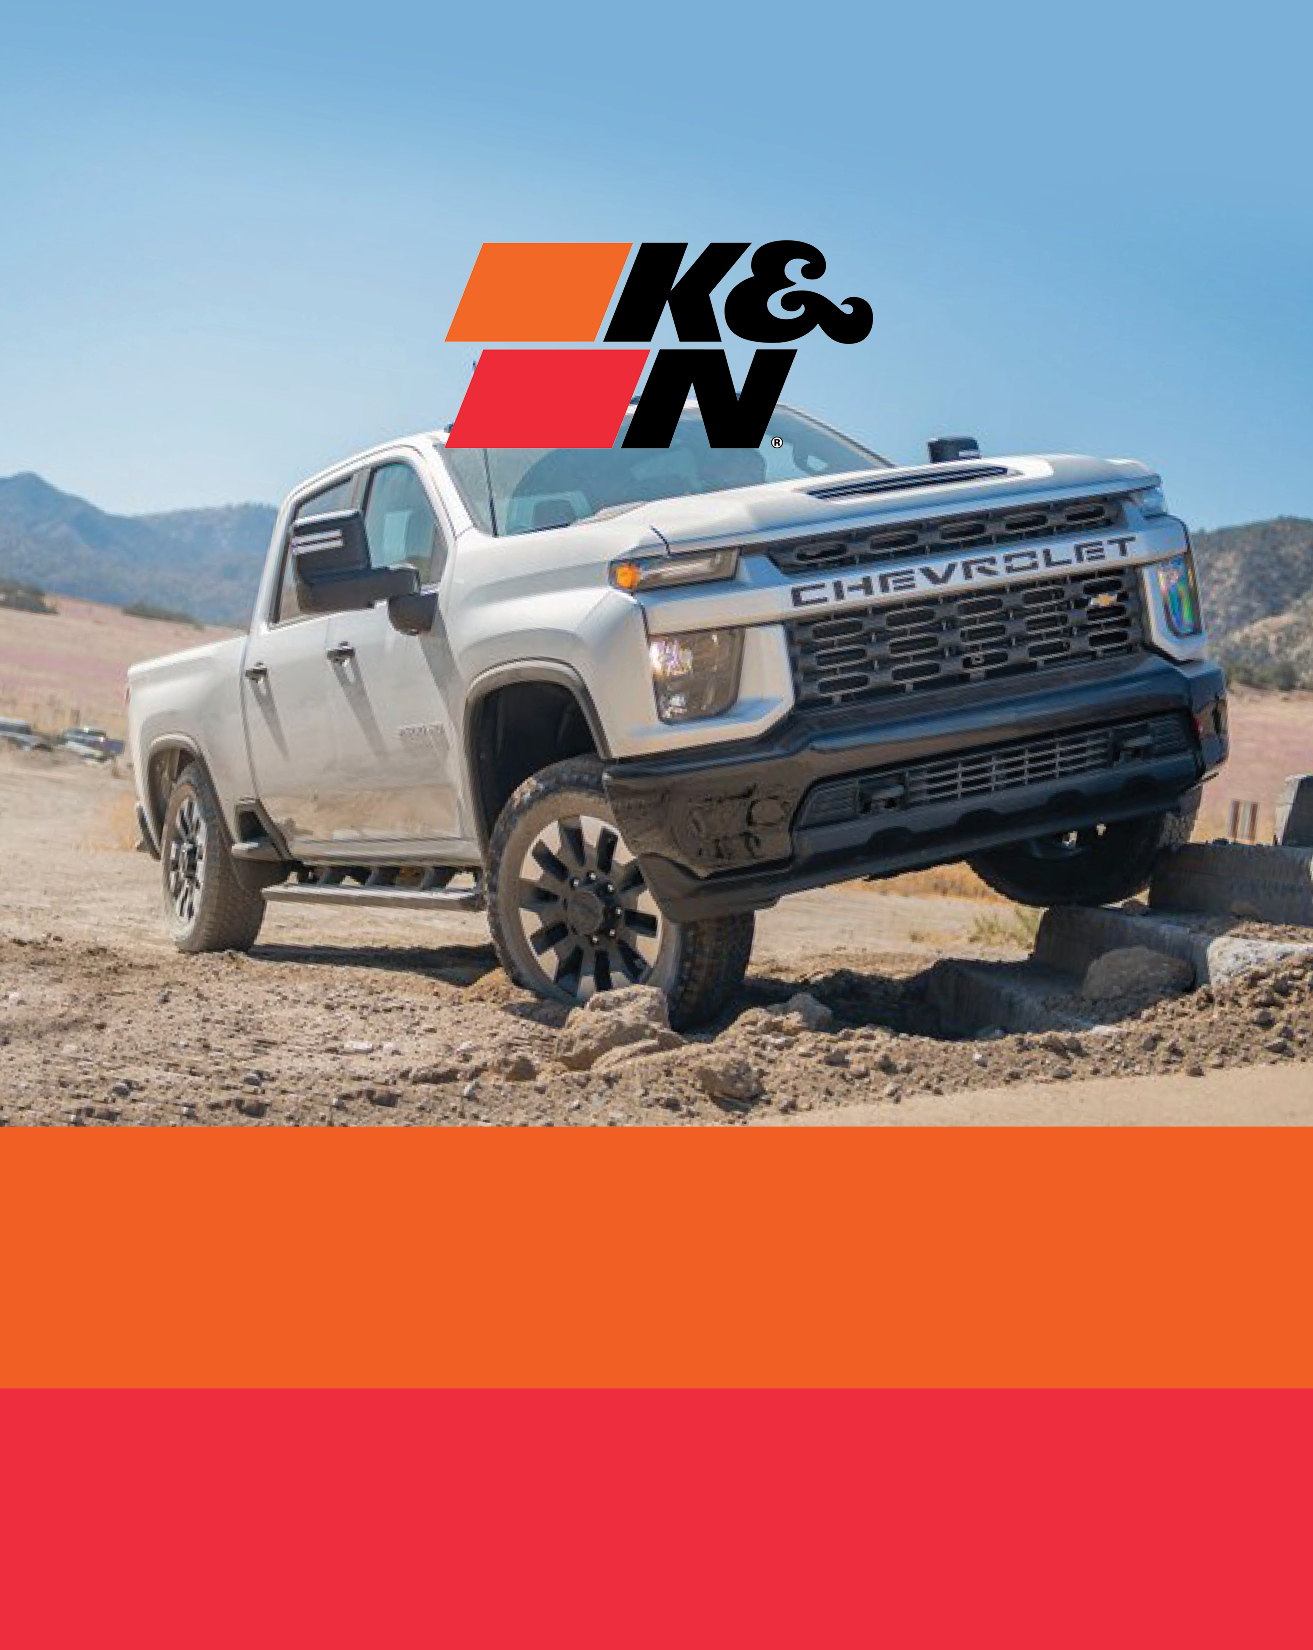 K&N Drop-In Filter for the 2020 Silverado and Sierra